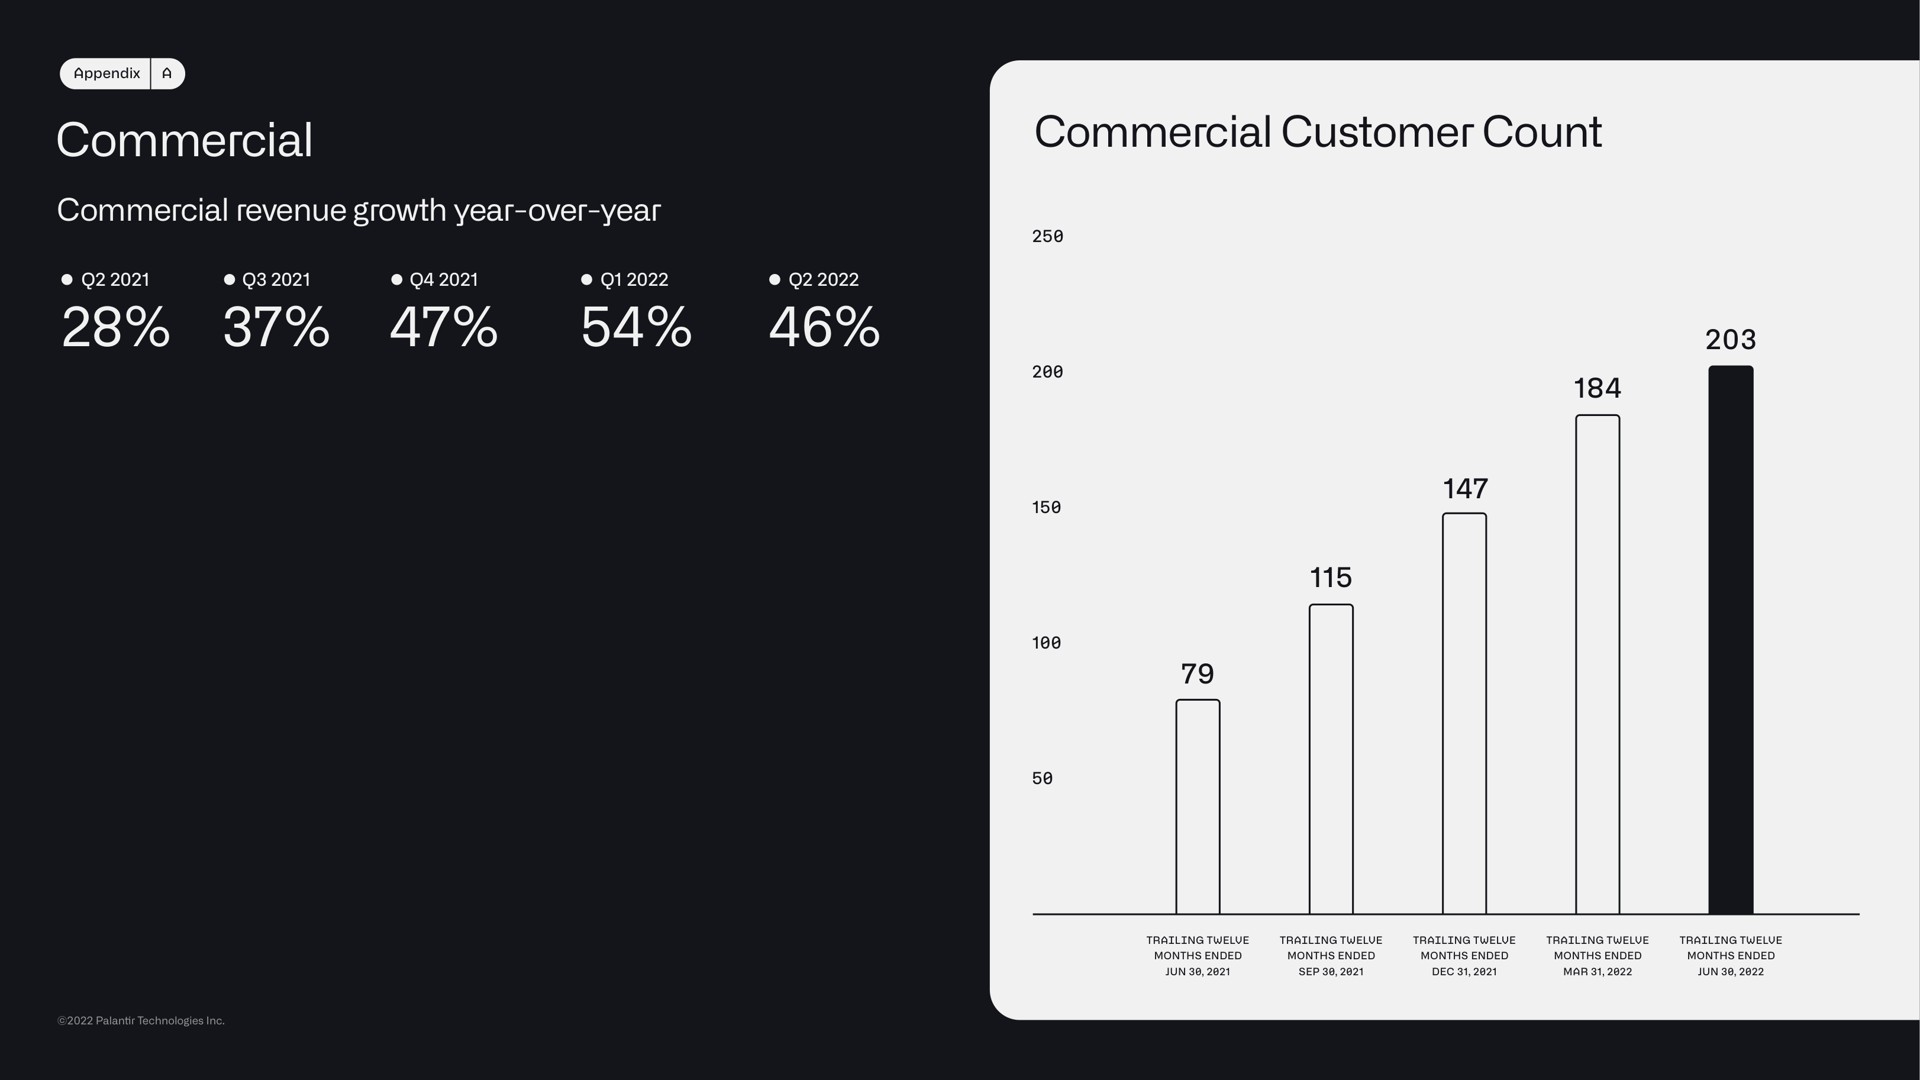 commercial commercial revenue growth year over year commercial customer count a | Palantir